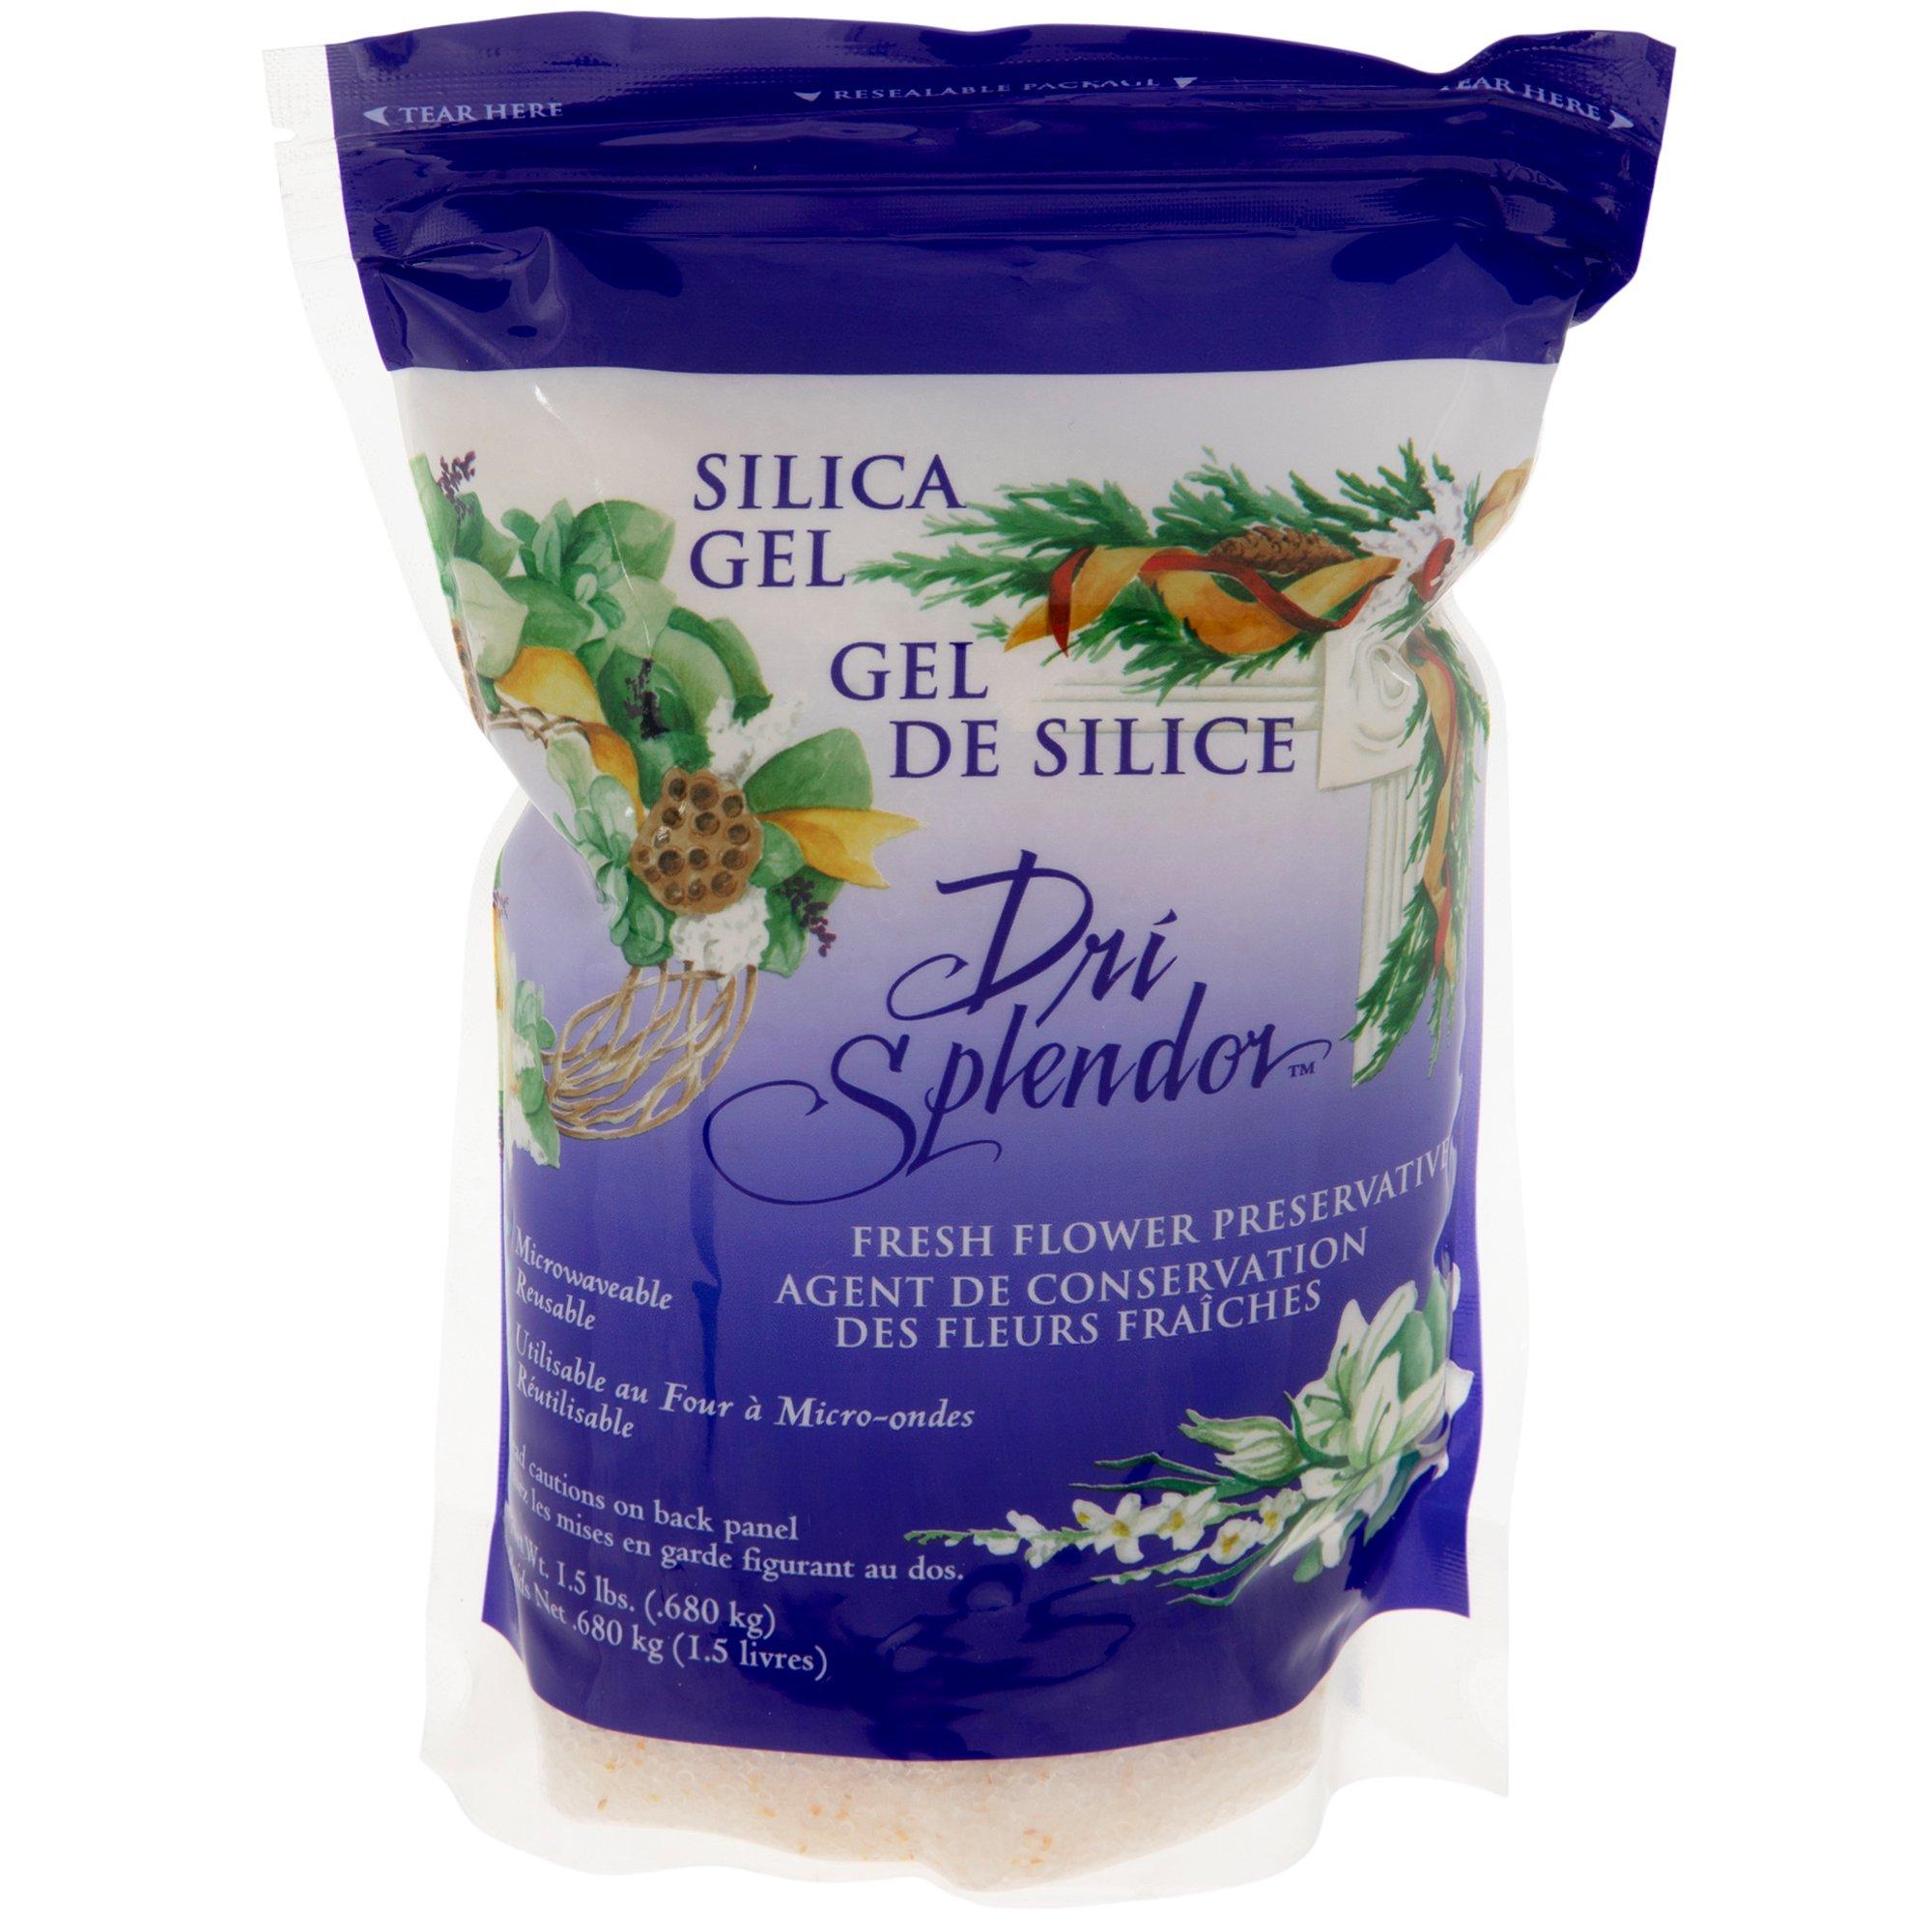 Best Silica Gel: Flower Drying And Preserving for sale in Peoria